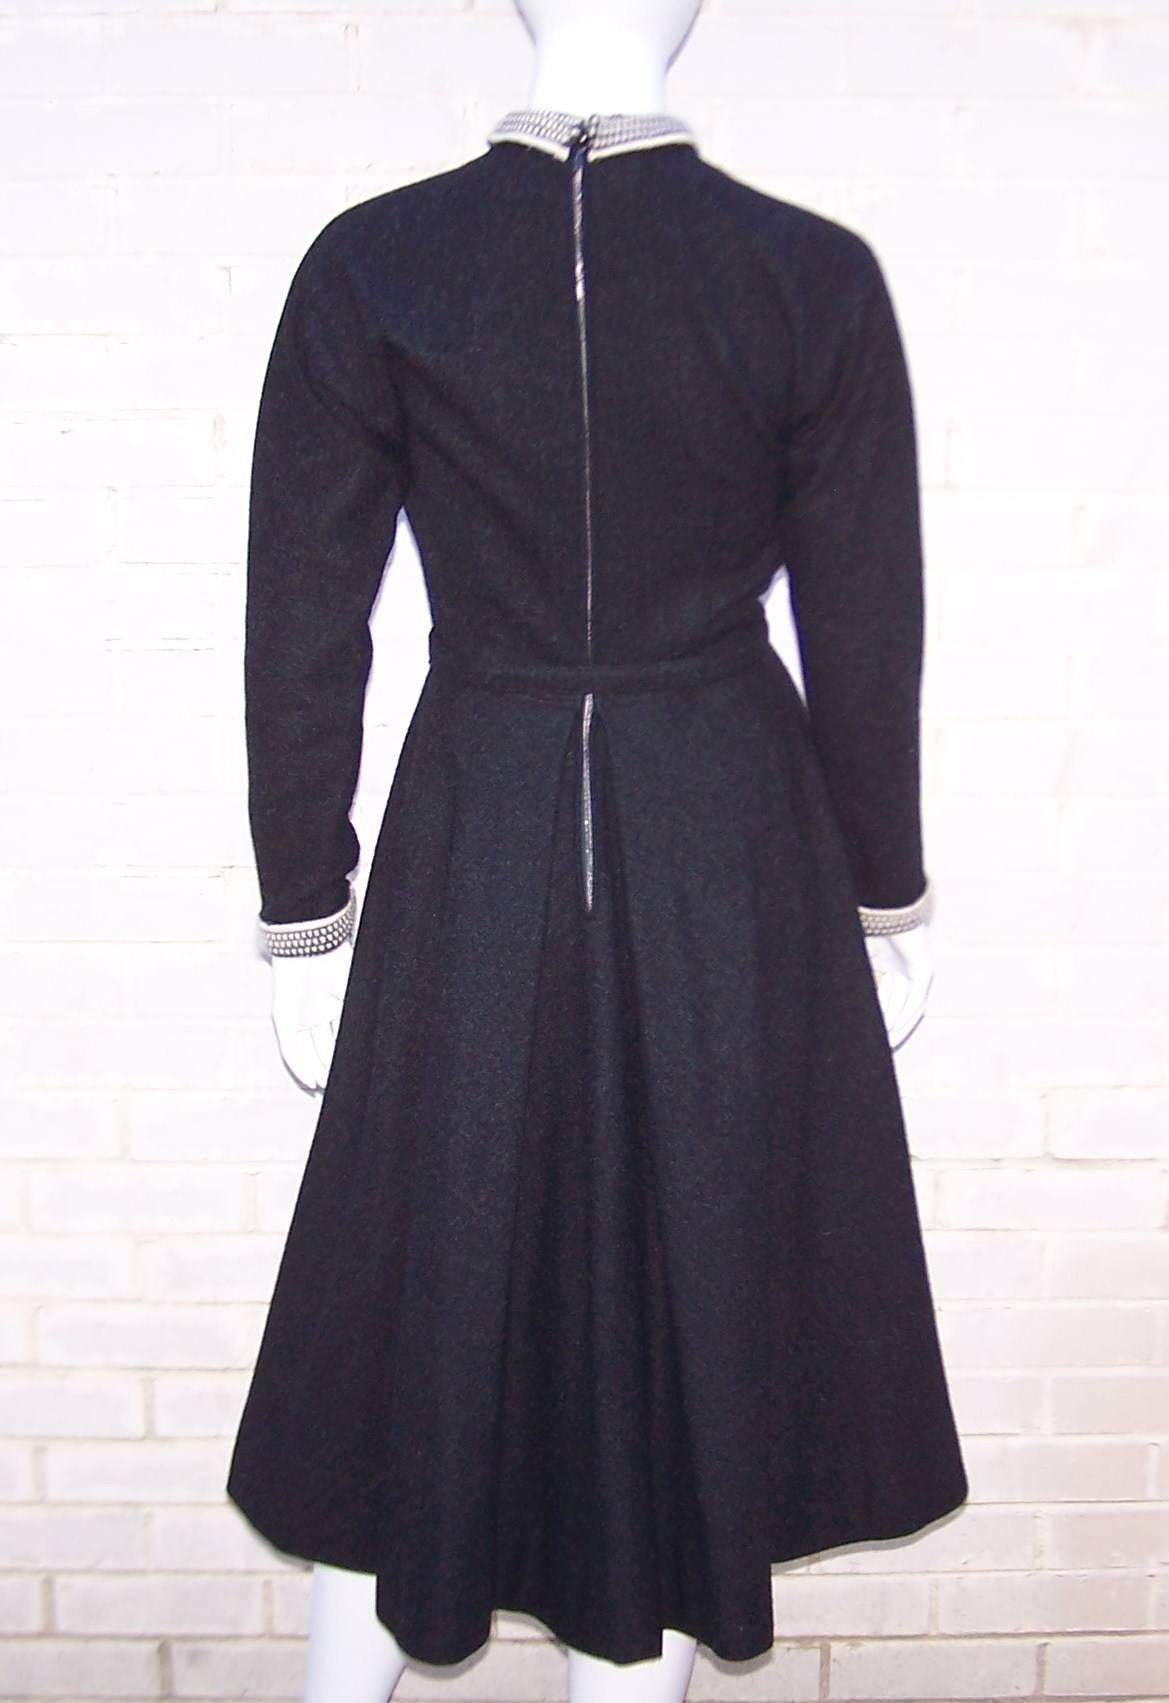 School Girl Style 1950's Charcoal Gray Wool Dress With Angora Details 1